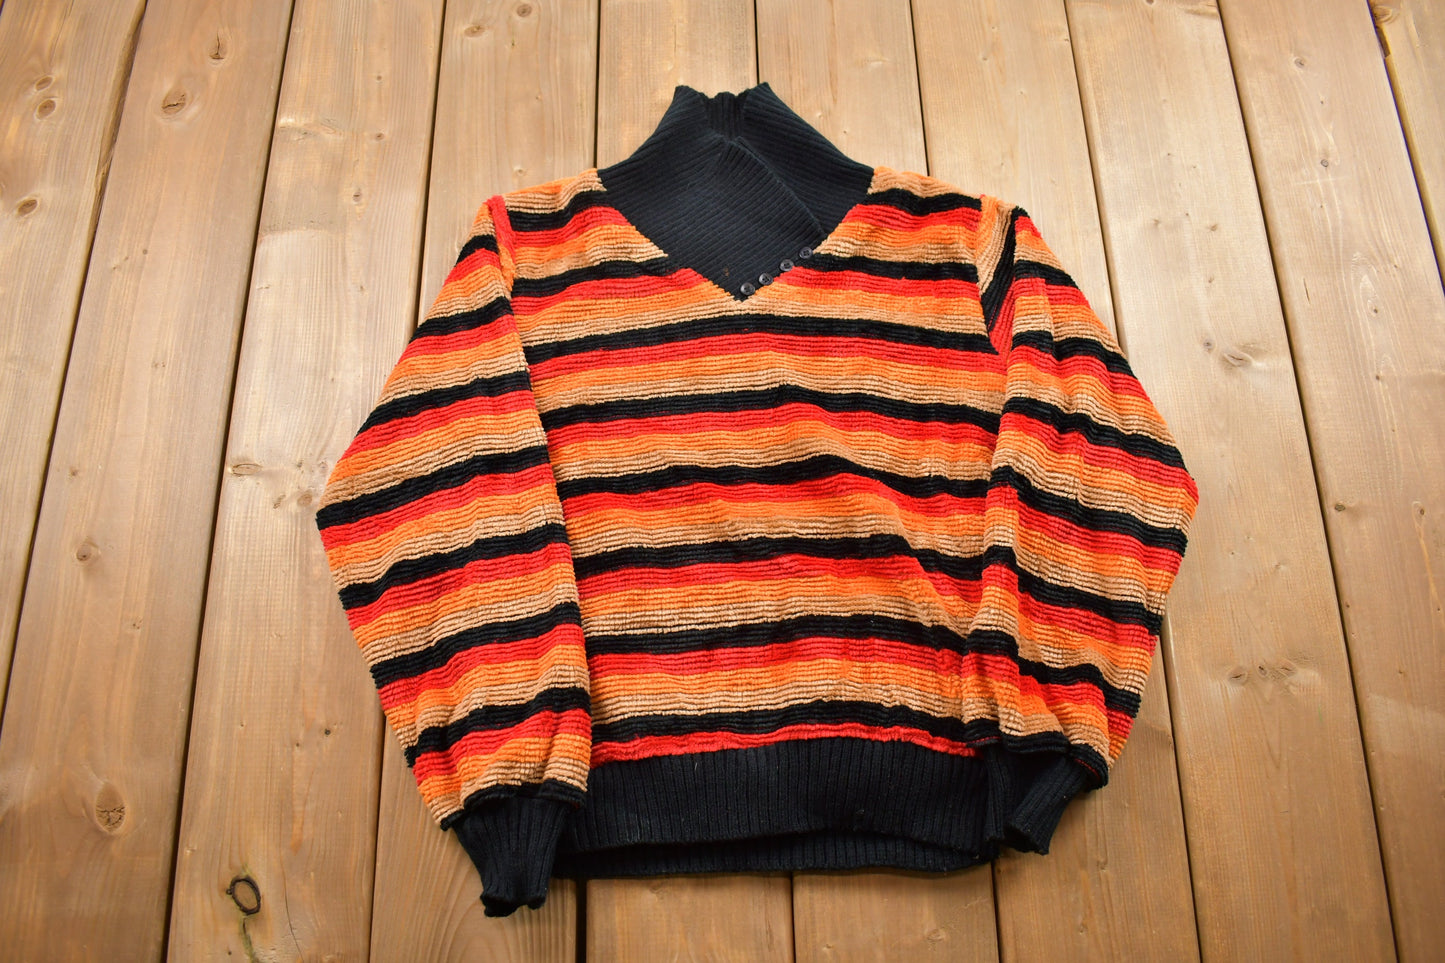 Vintage 1990s Cadogan Court Striped Knitted Sweater / Vintage 90s Sweater / All Over Pattern / Colorful / Sweatshirt / Abstract Pattern